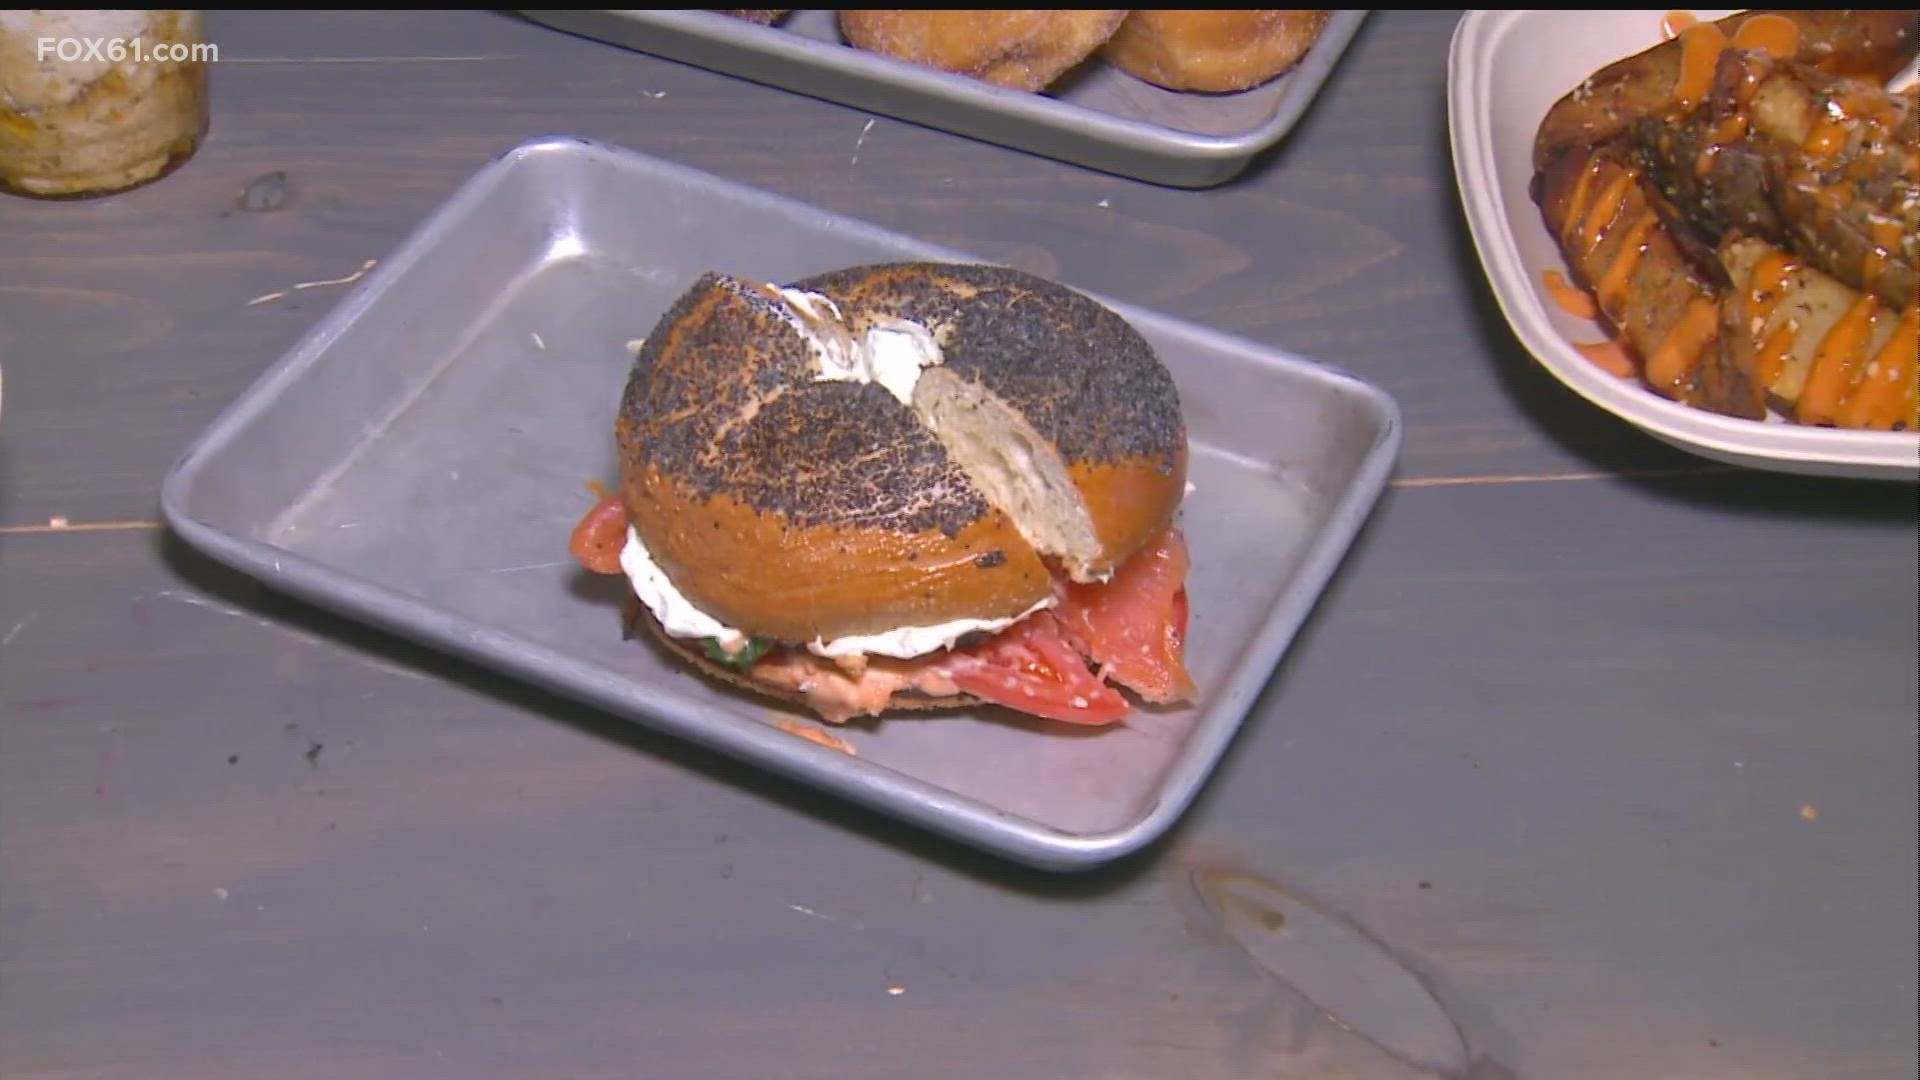 These aren't your ordinary bagels! FOX61's Sean Pragano stops by Glastonbury's Seed Kitchen & Bagelry for this week's Foodie Friday!